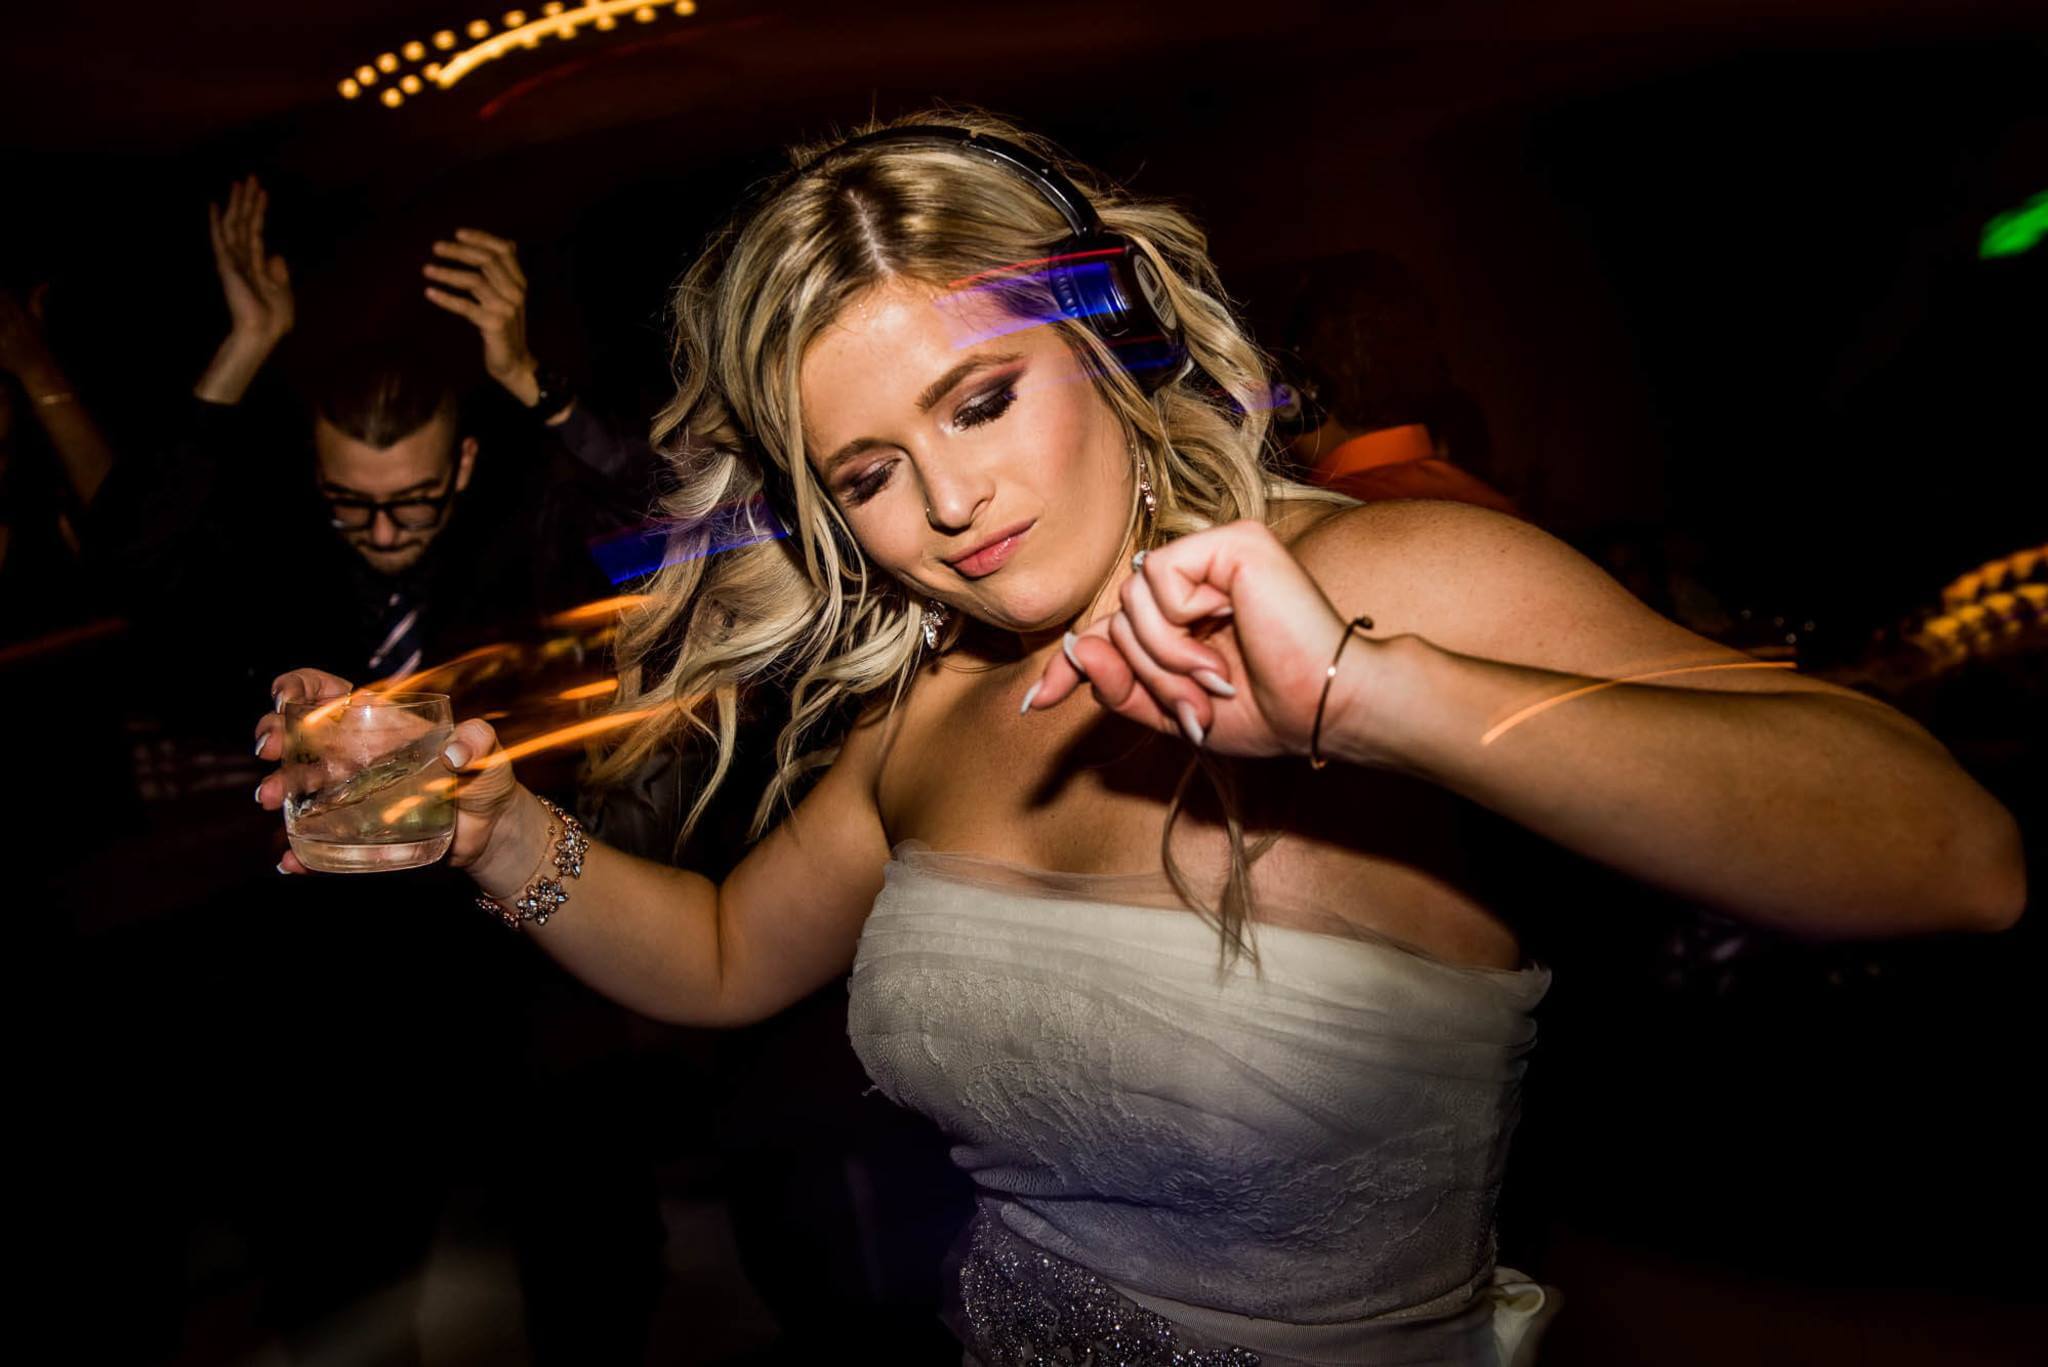 “Every Wedding Is Special.” Dr. Beat Productions Creates the Perfect Dance Floor Every Time